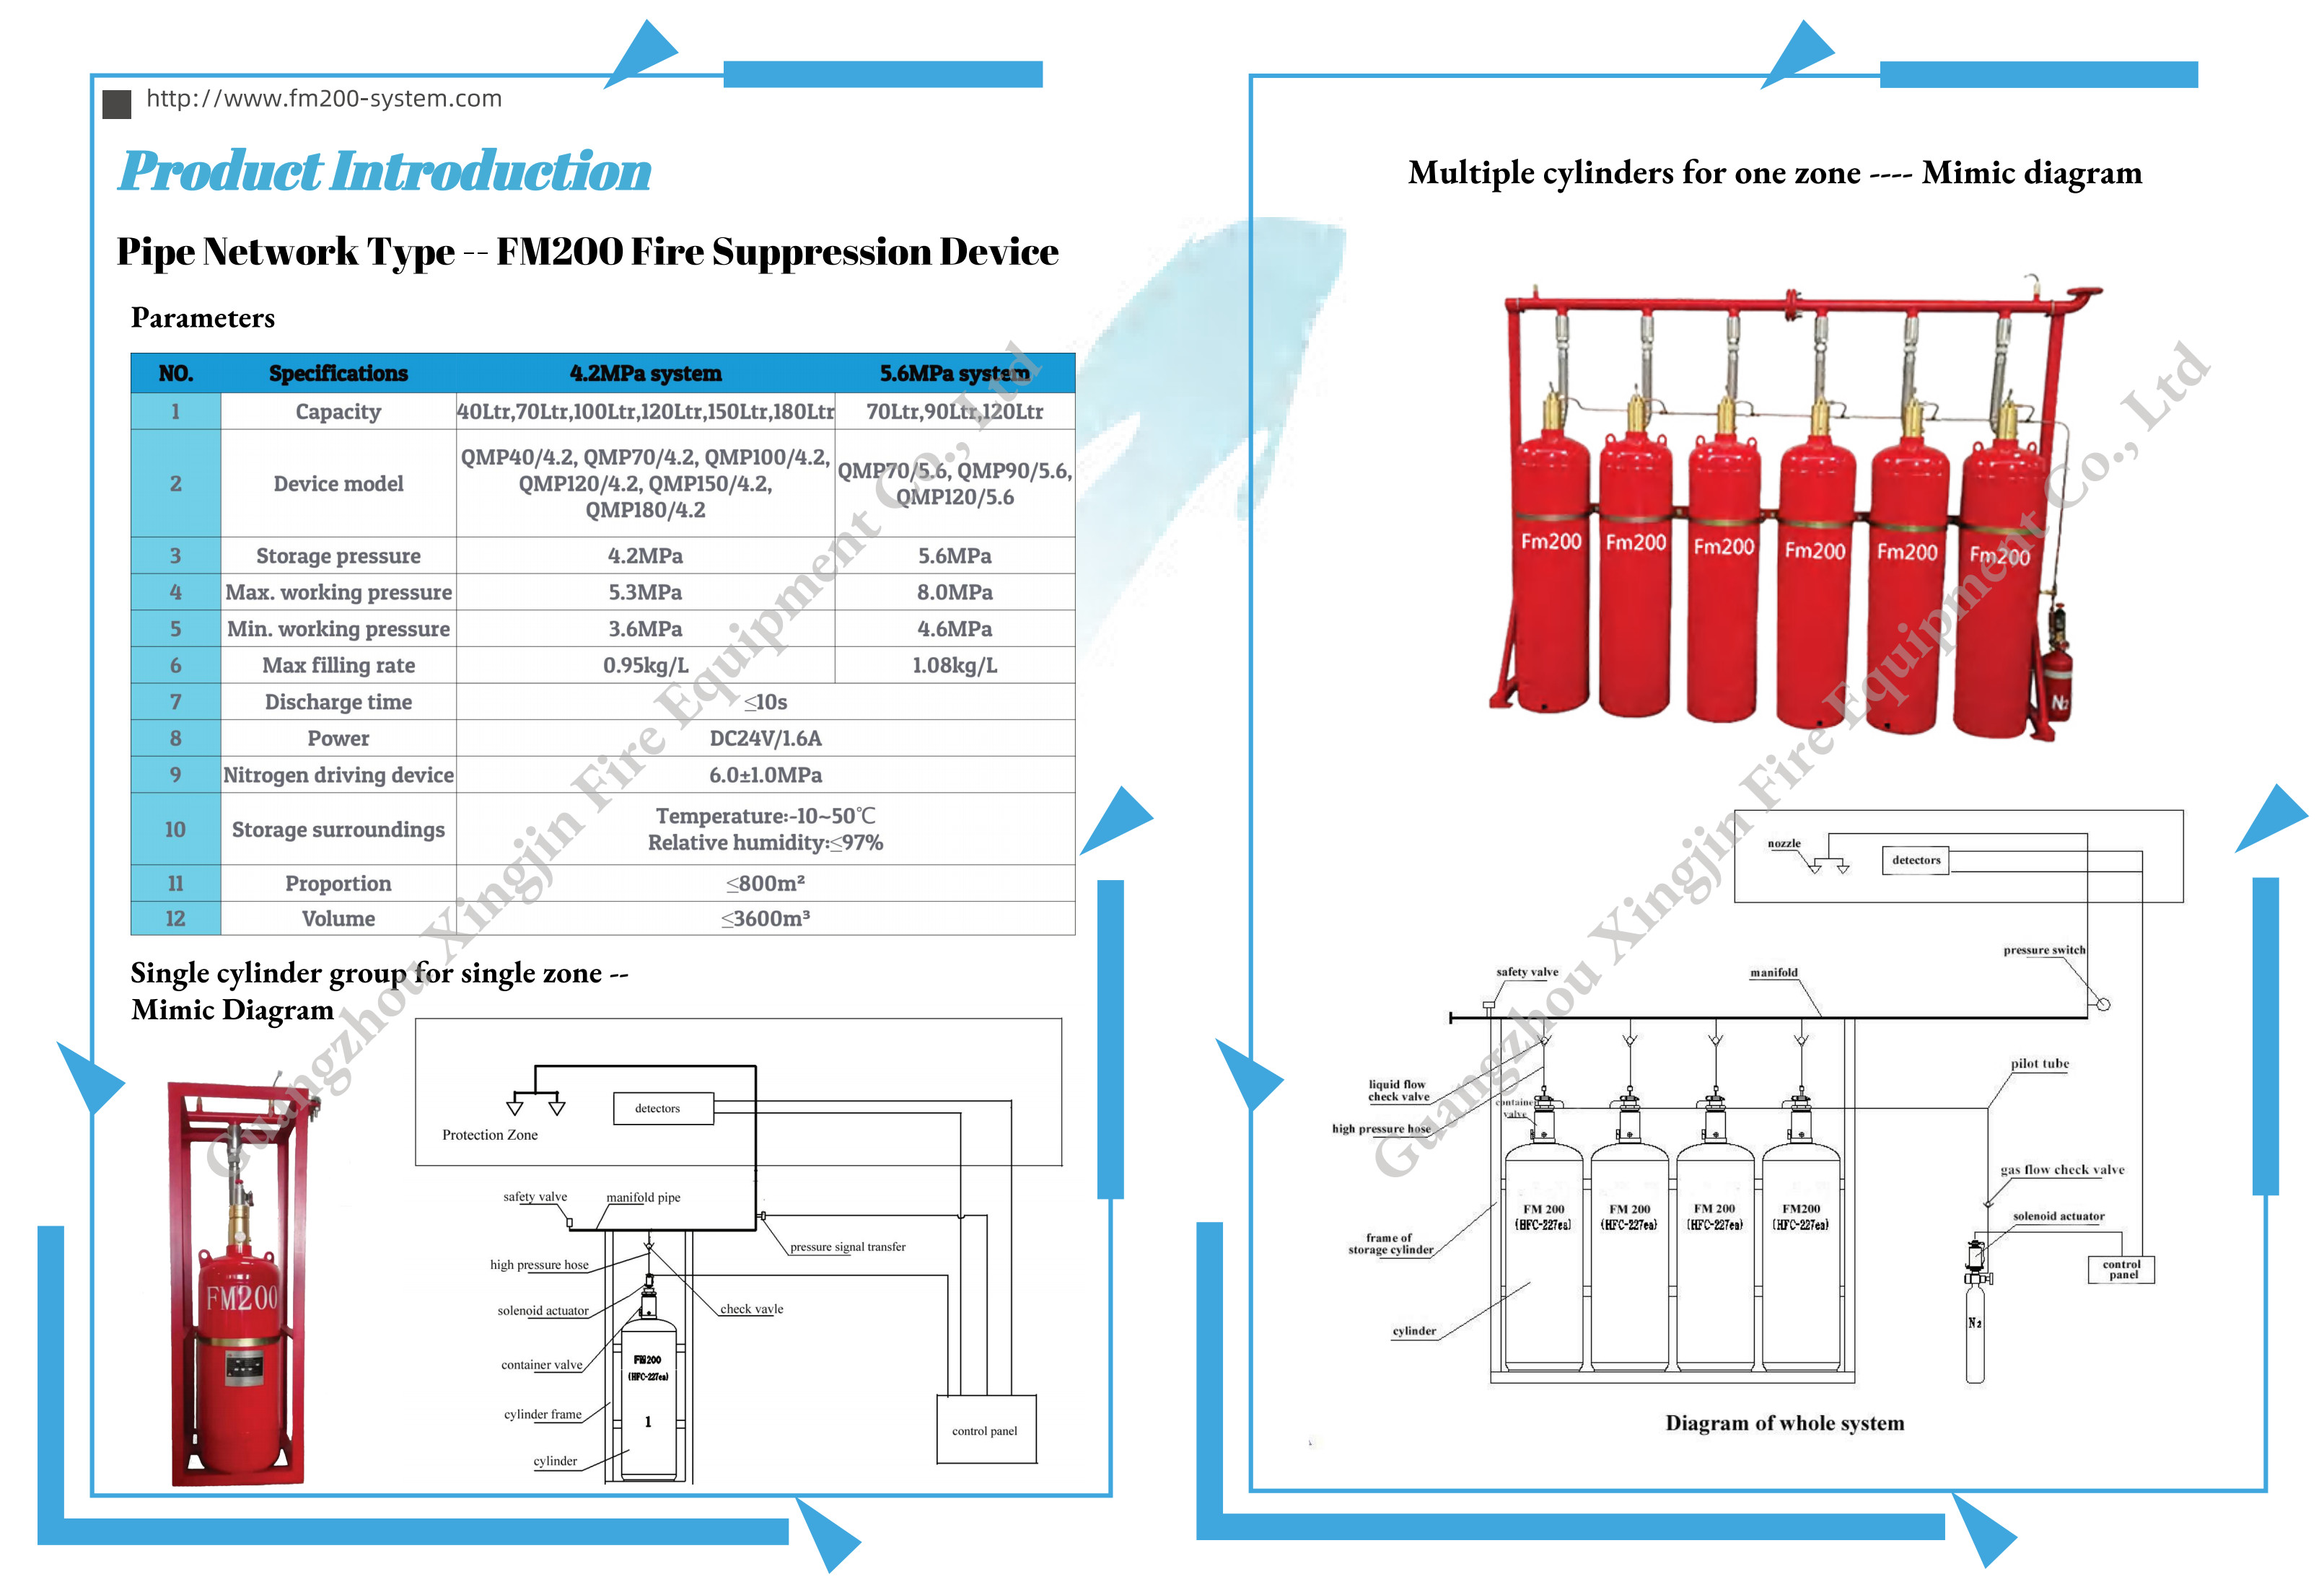 Latest company case about Catalogue of FM200 fire suppression system--pipe network type(2021 edition)